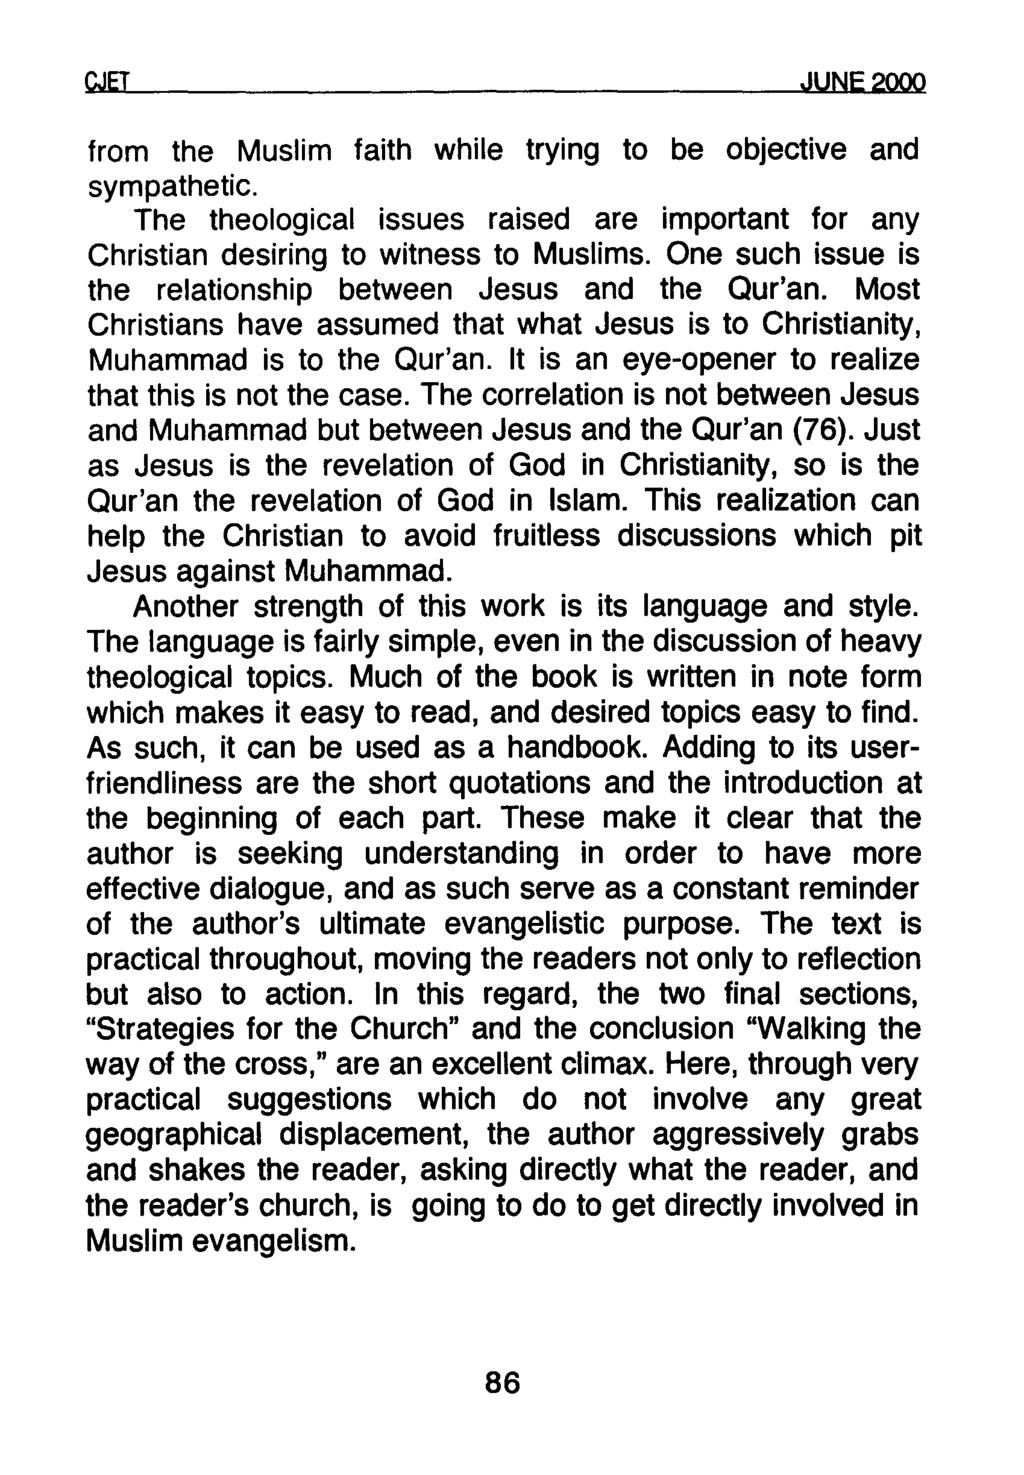 CJET JUNE200Q from the Muslim faith while trying to be objective and sympathetic. The theological issues raised are important for any Christian desiring to witness to Muslims.